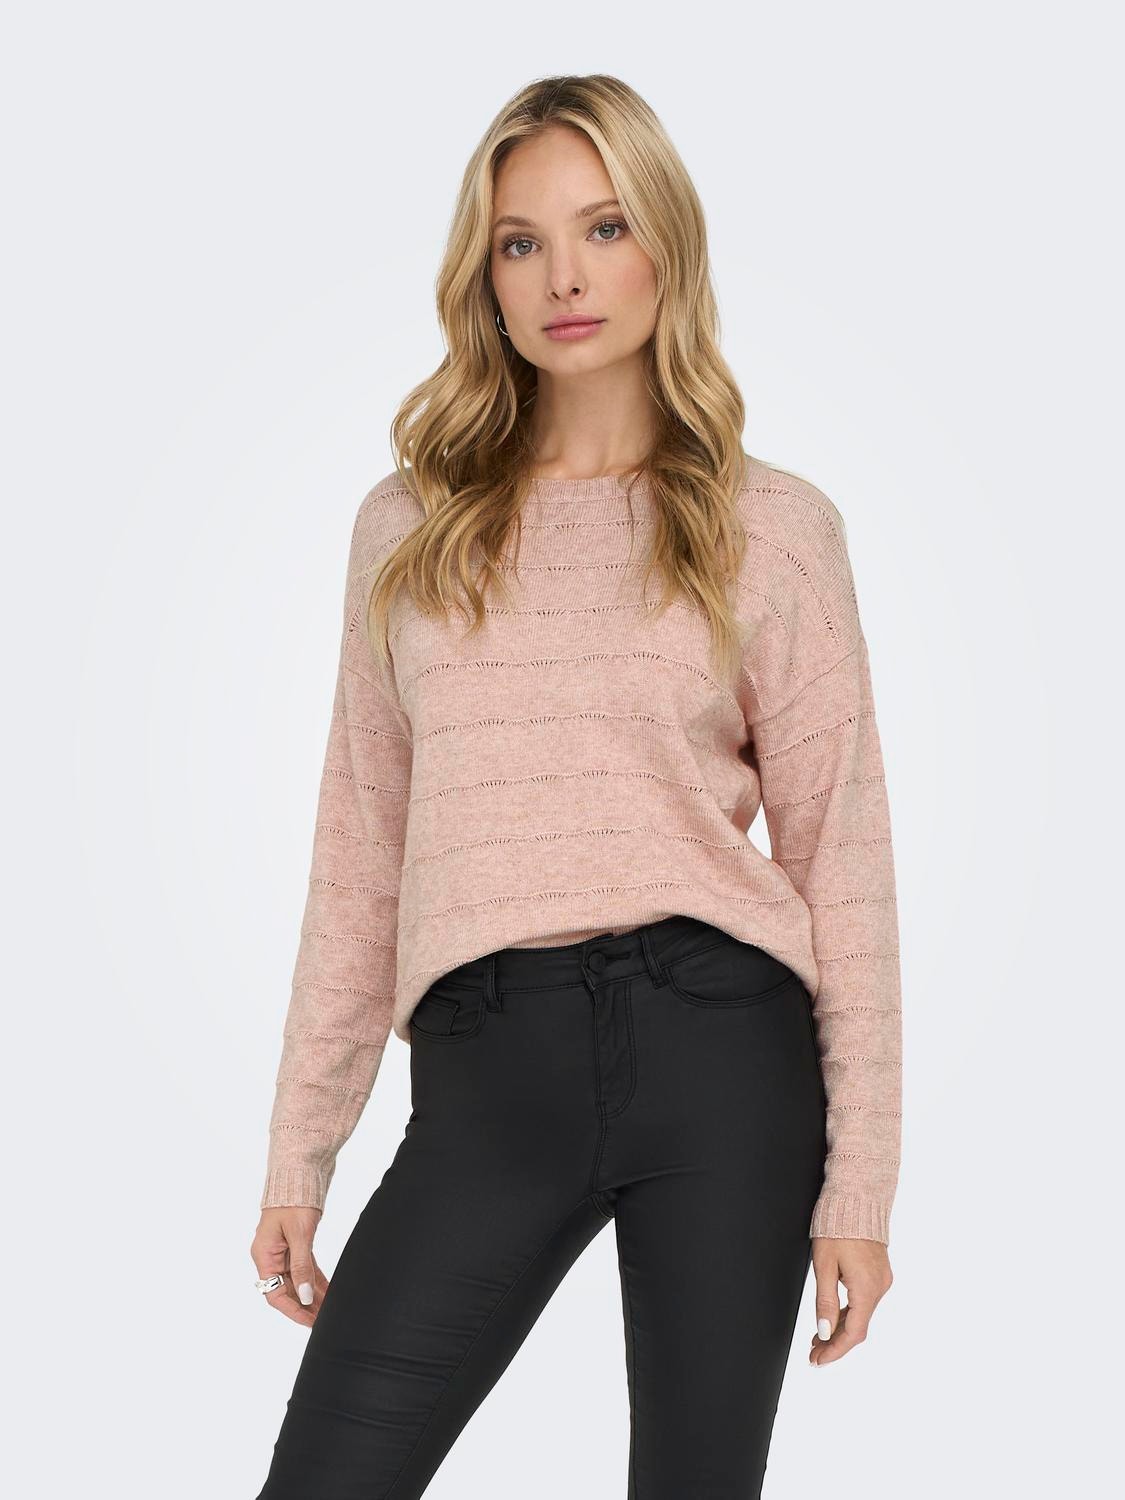 ONLY o-neck knit with long sleeves -Rose Smoke - 15294115